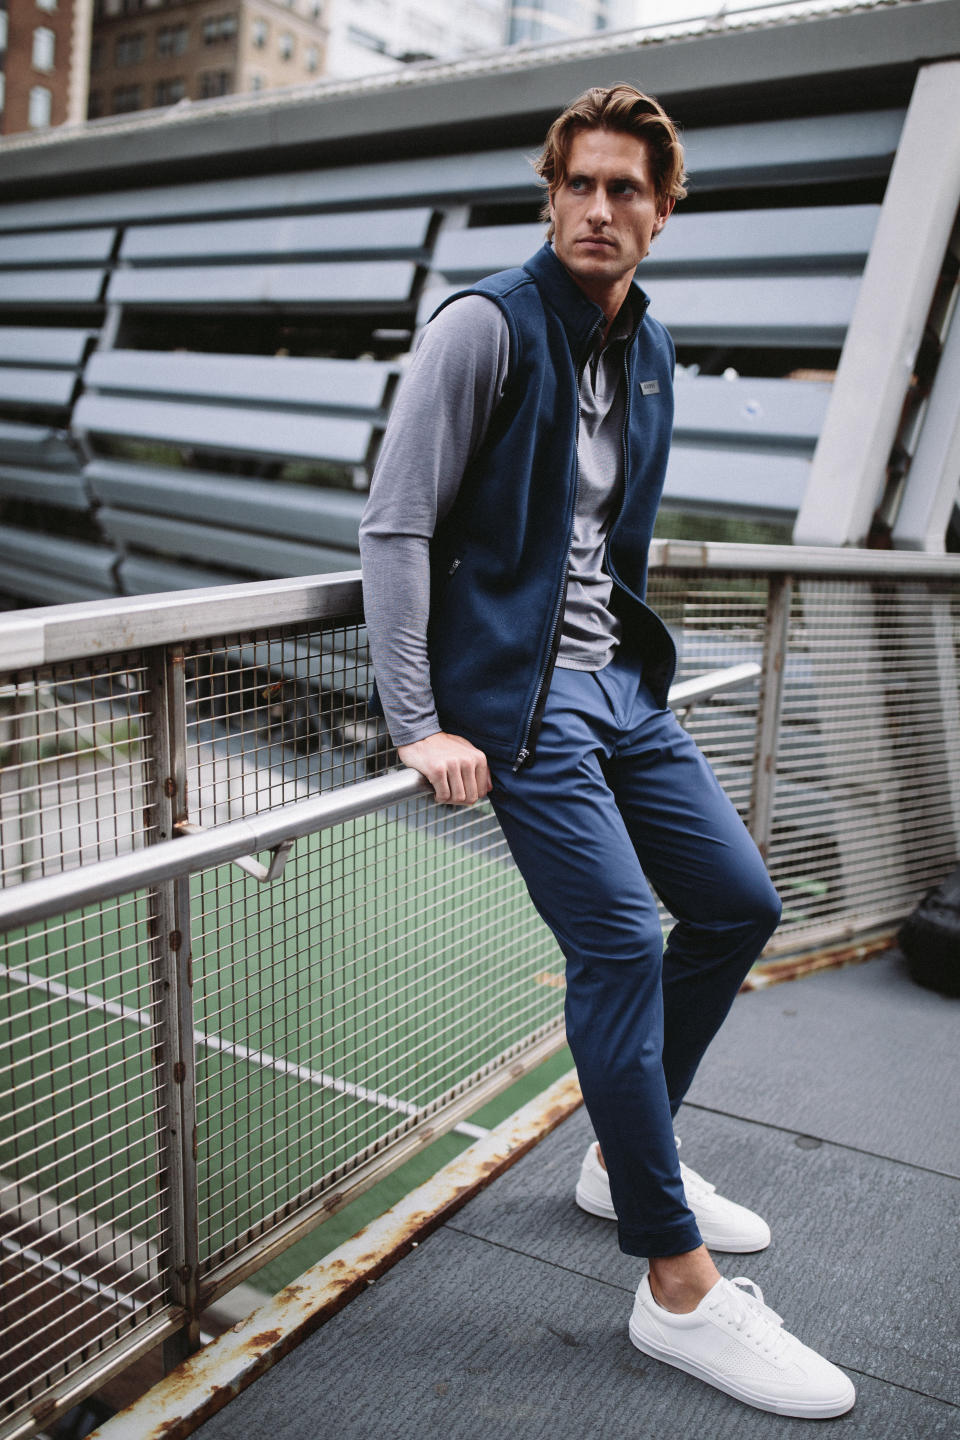 Looks from Rhone’s Commuter collection.